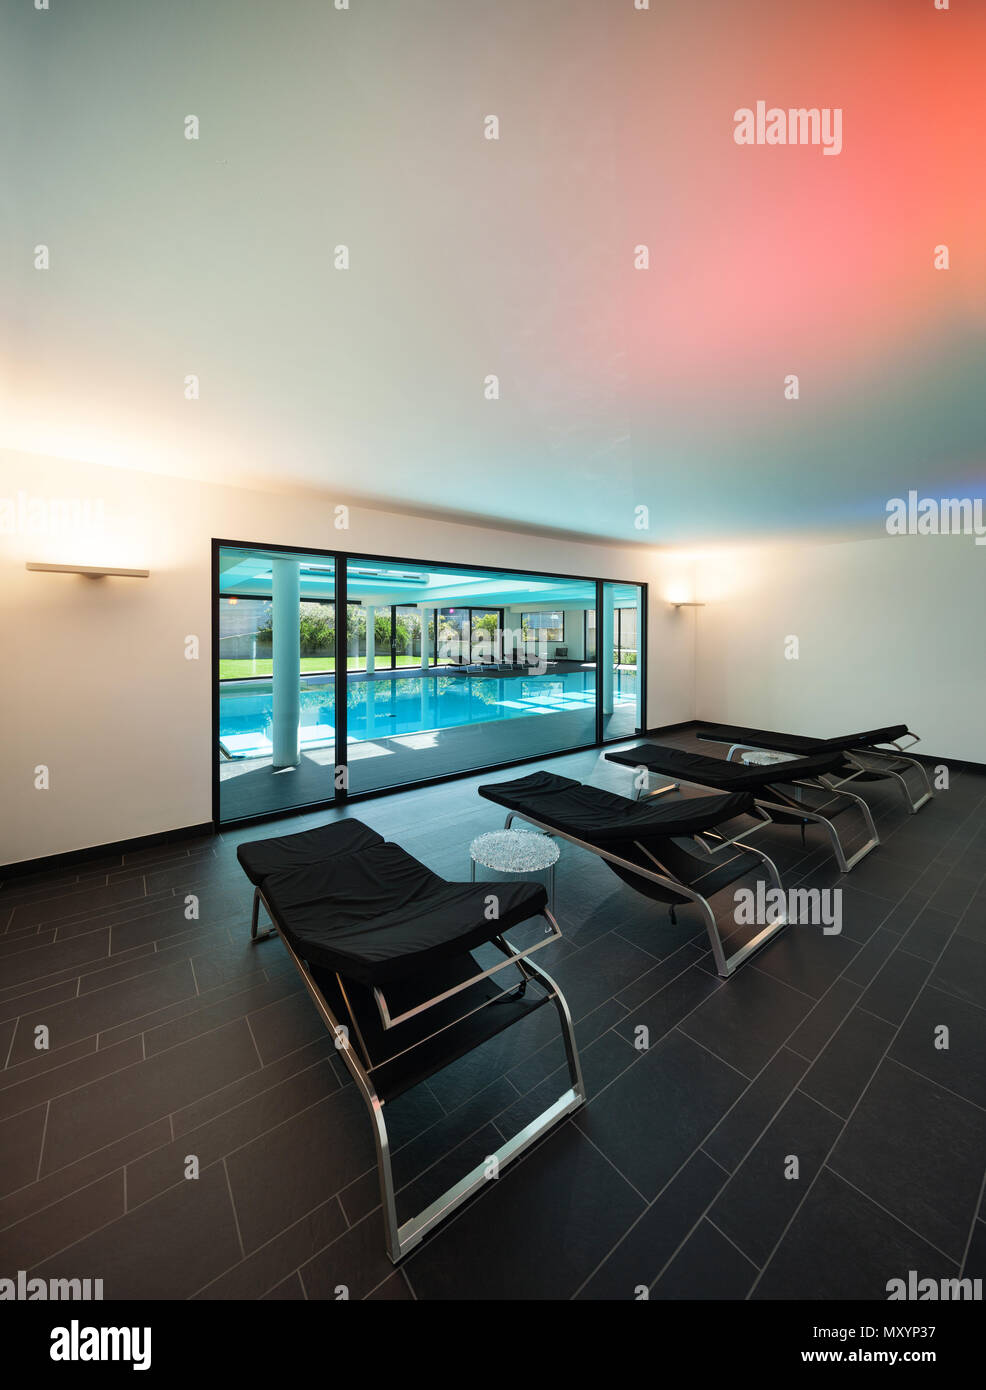 indoor swimming pool of a modern house with spa, room with sunbeds Stock Photo